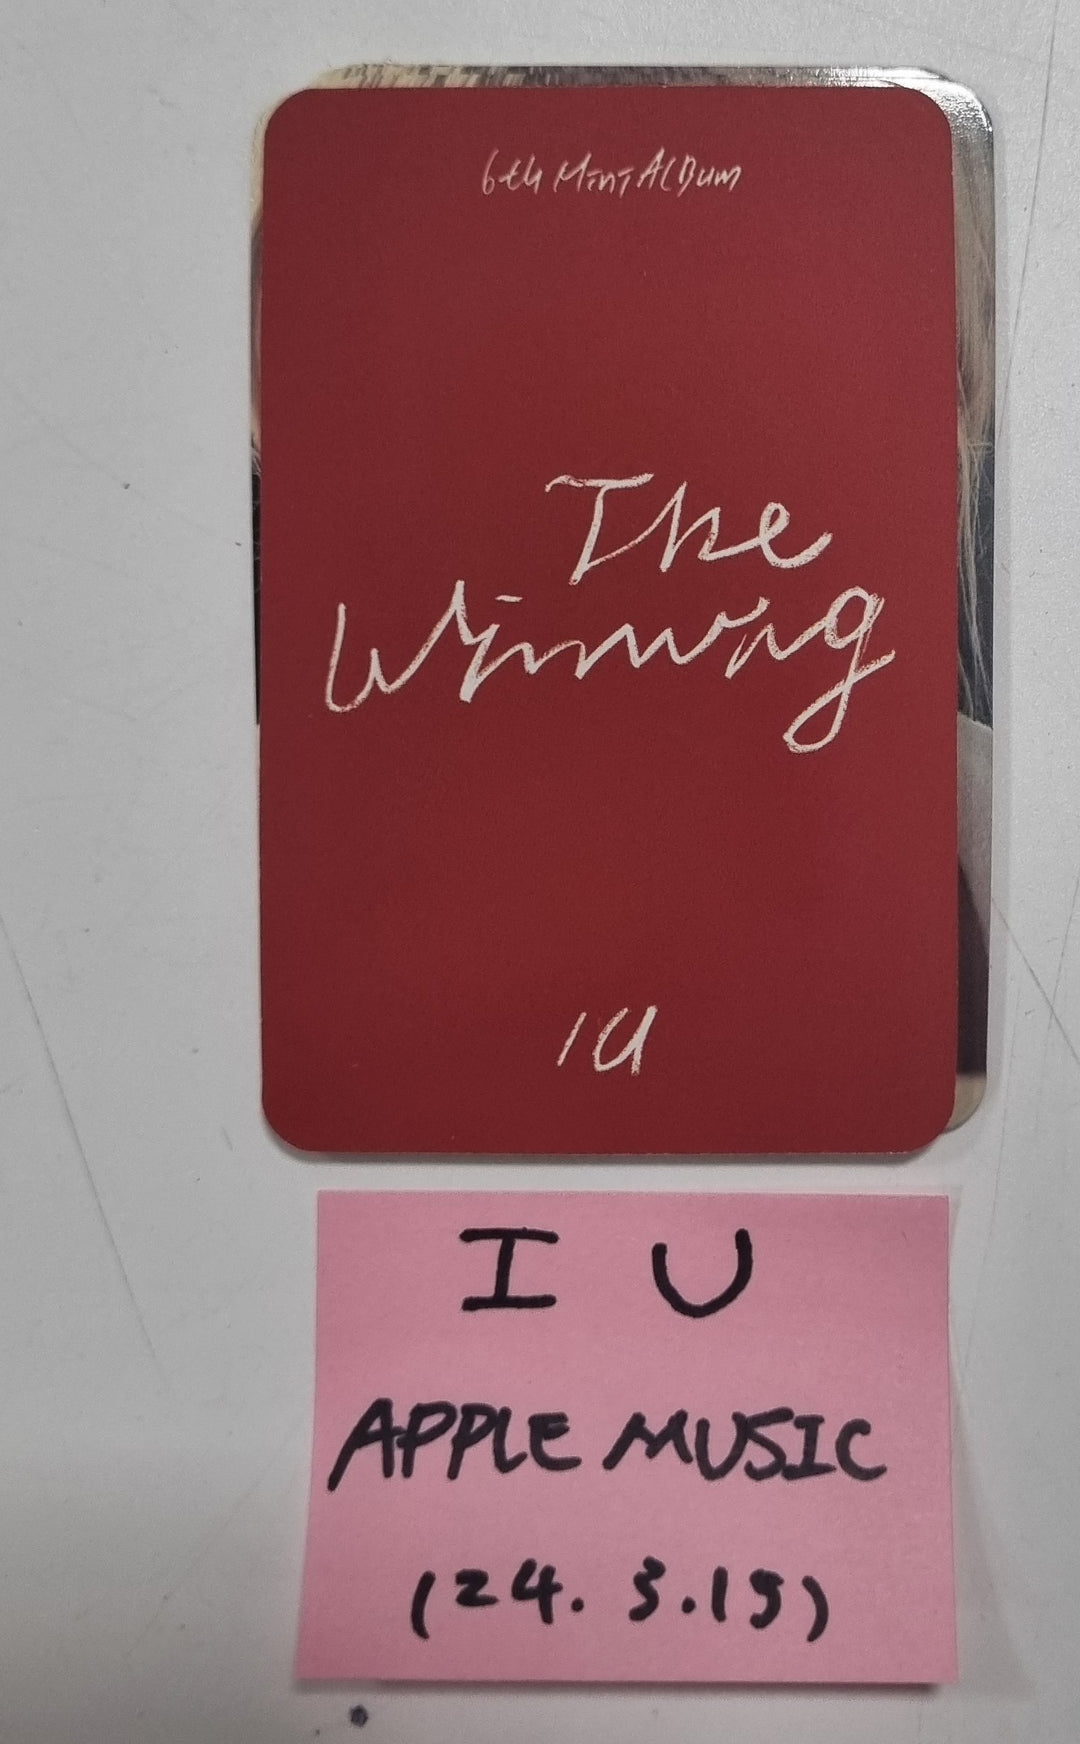 IU "The Winning" - Apple Music Fansign Event Photocards Round 2 [24.3.15]